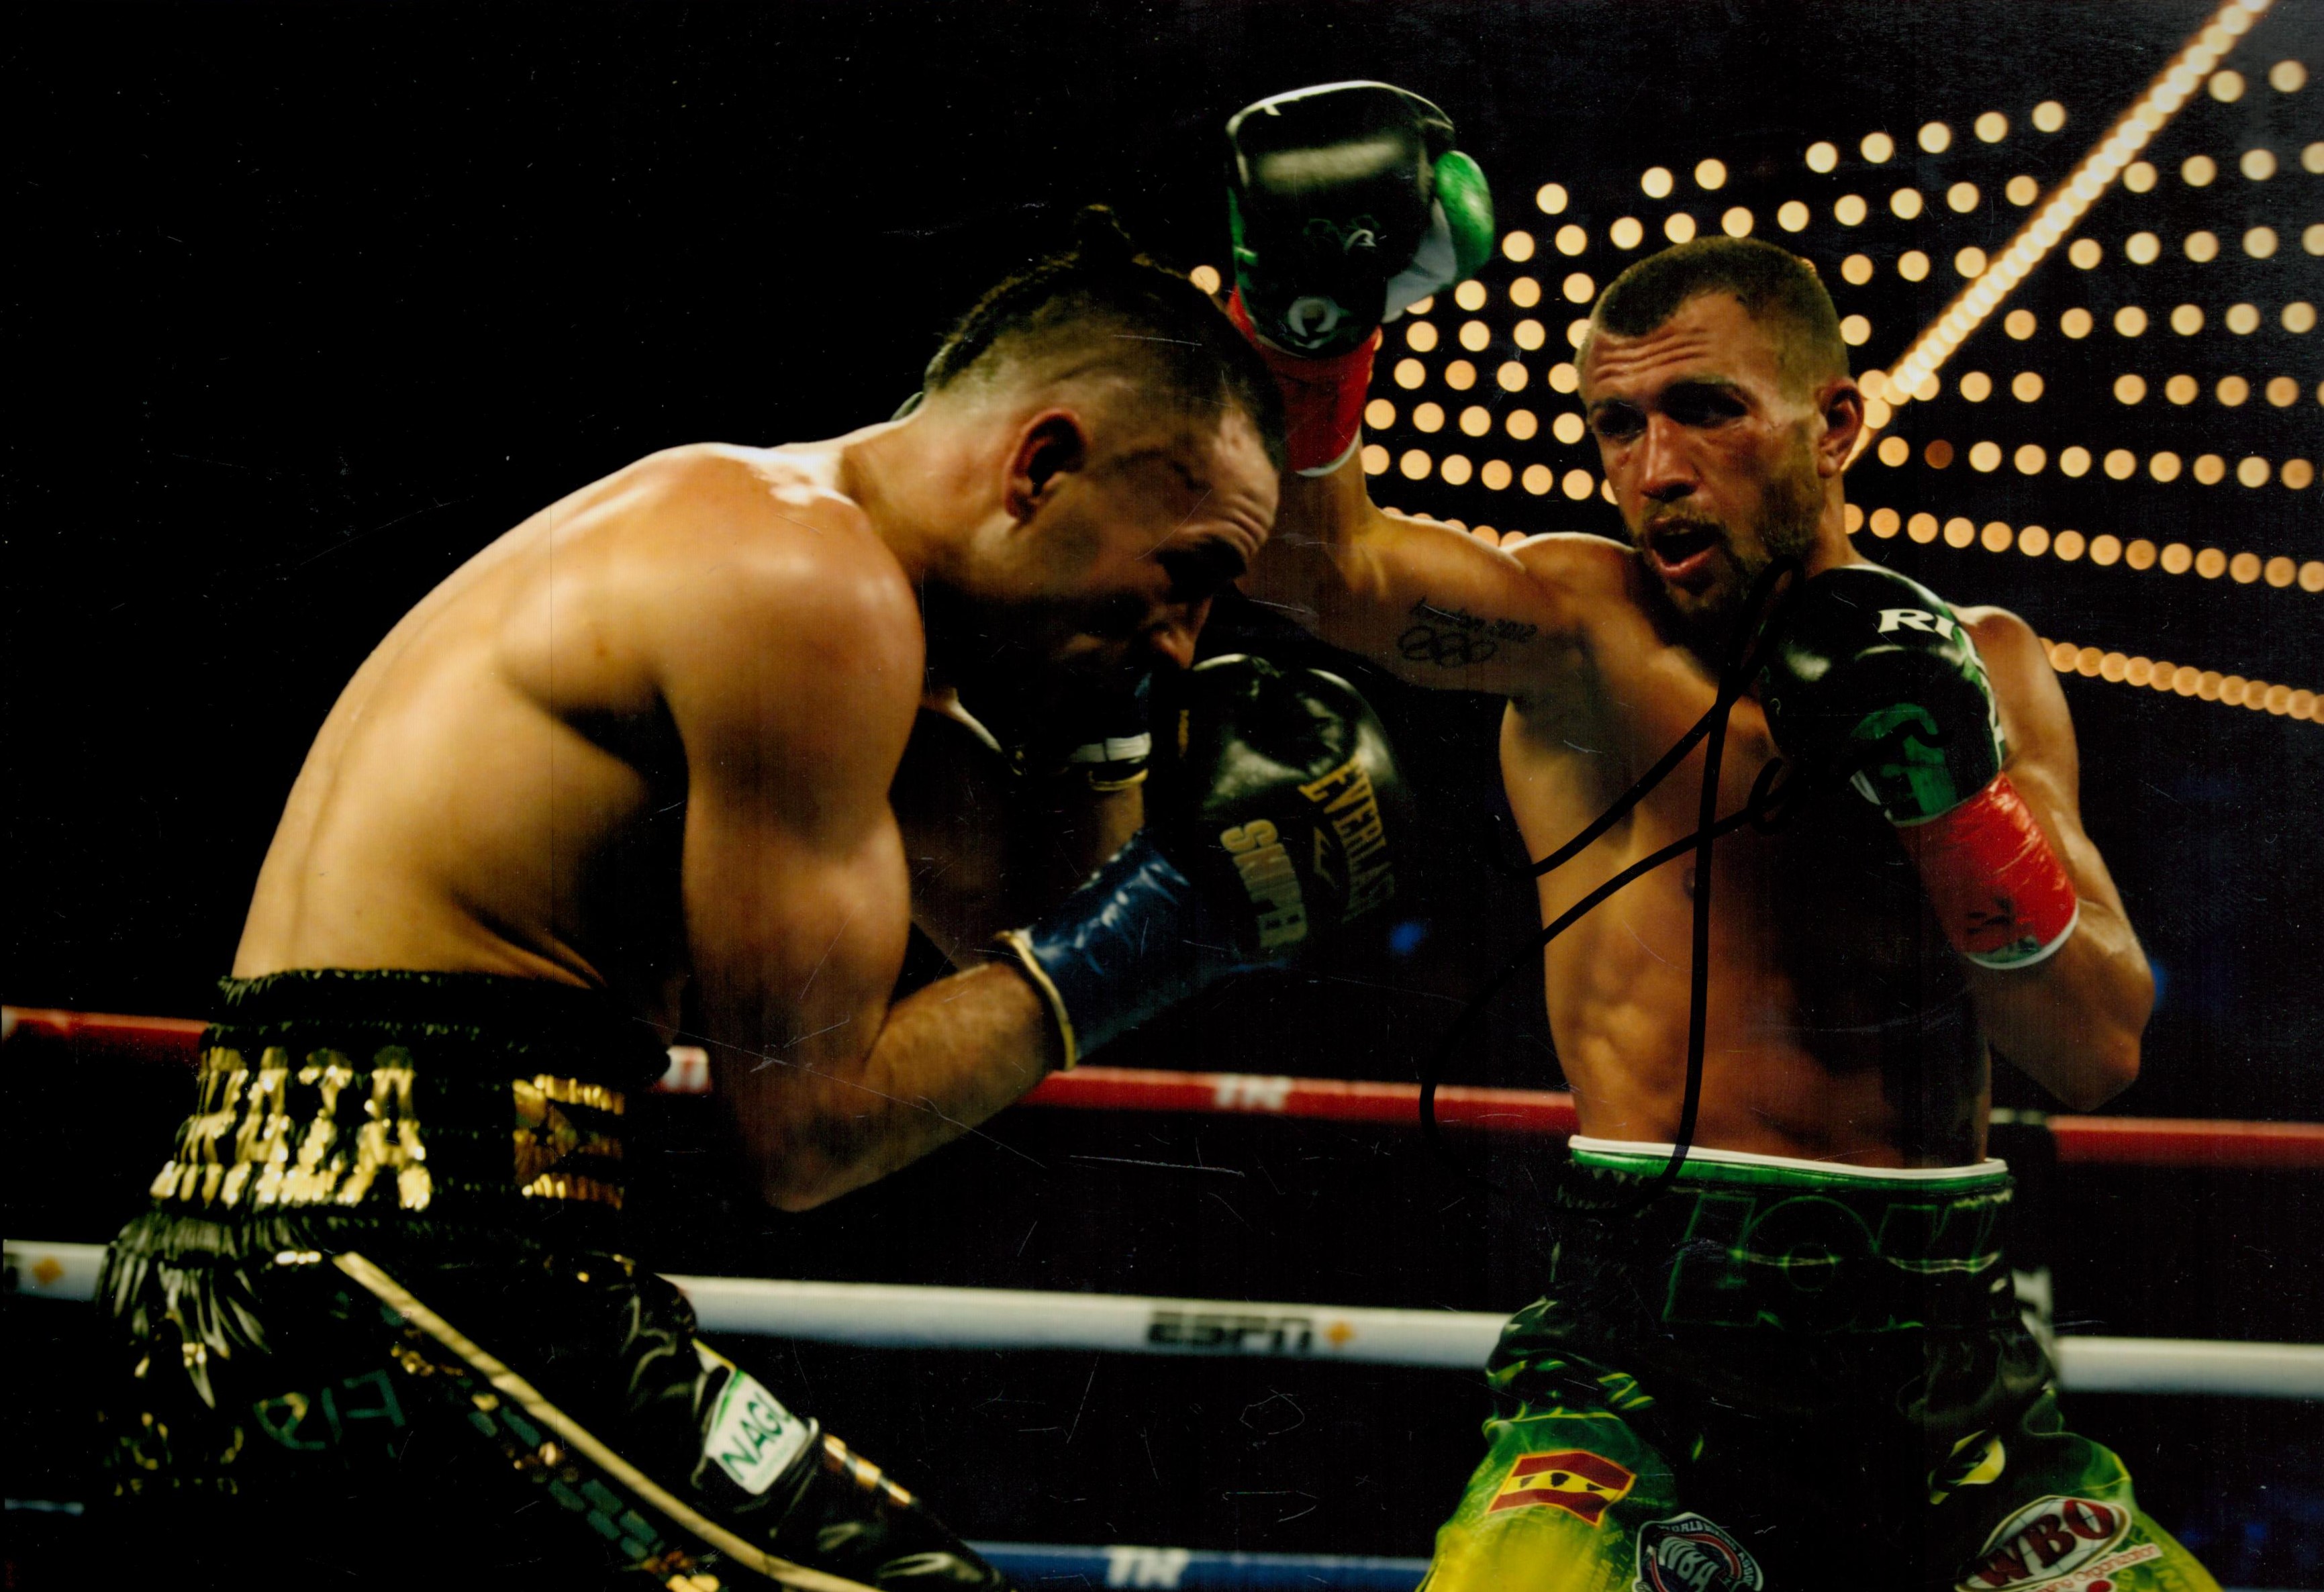 Boxing Star Vasiliy Lomachenko Signed 12x8 inch Colour In Action Photo. Signed in black ink. Good